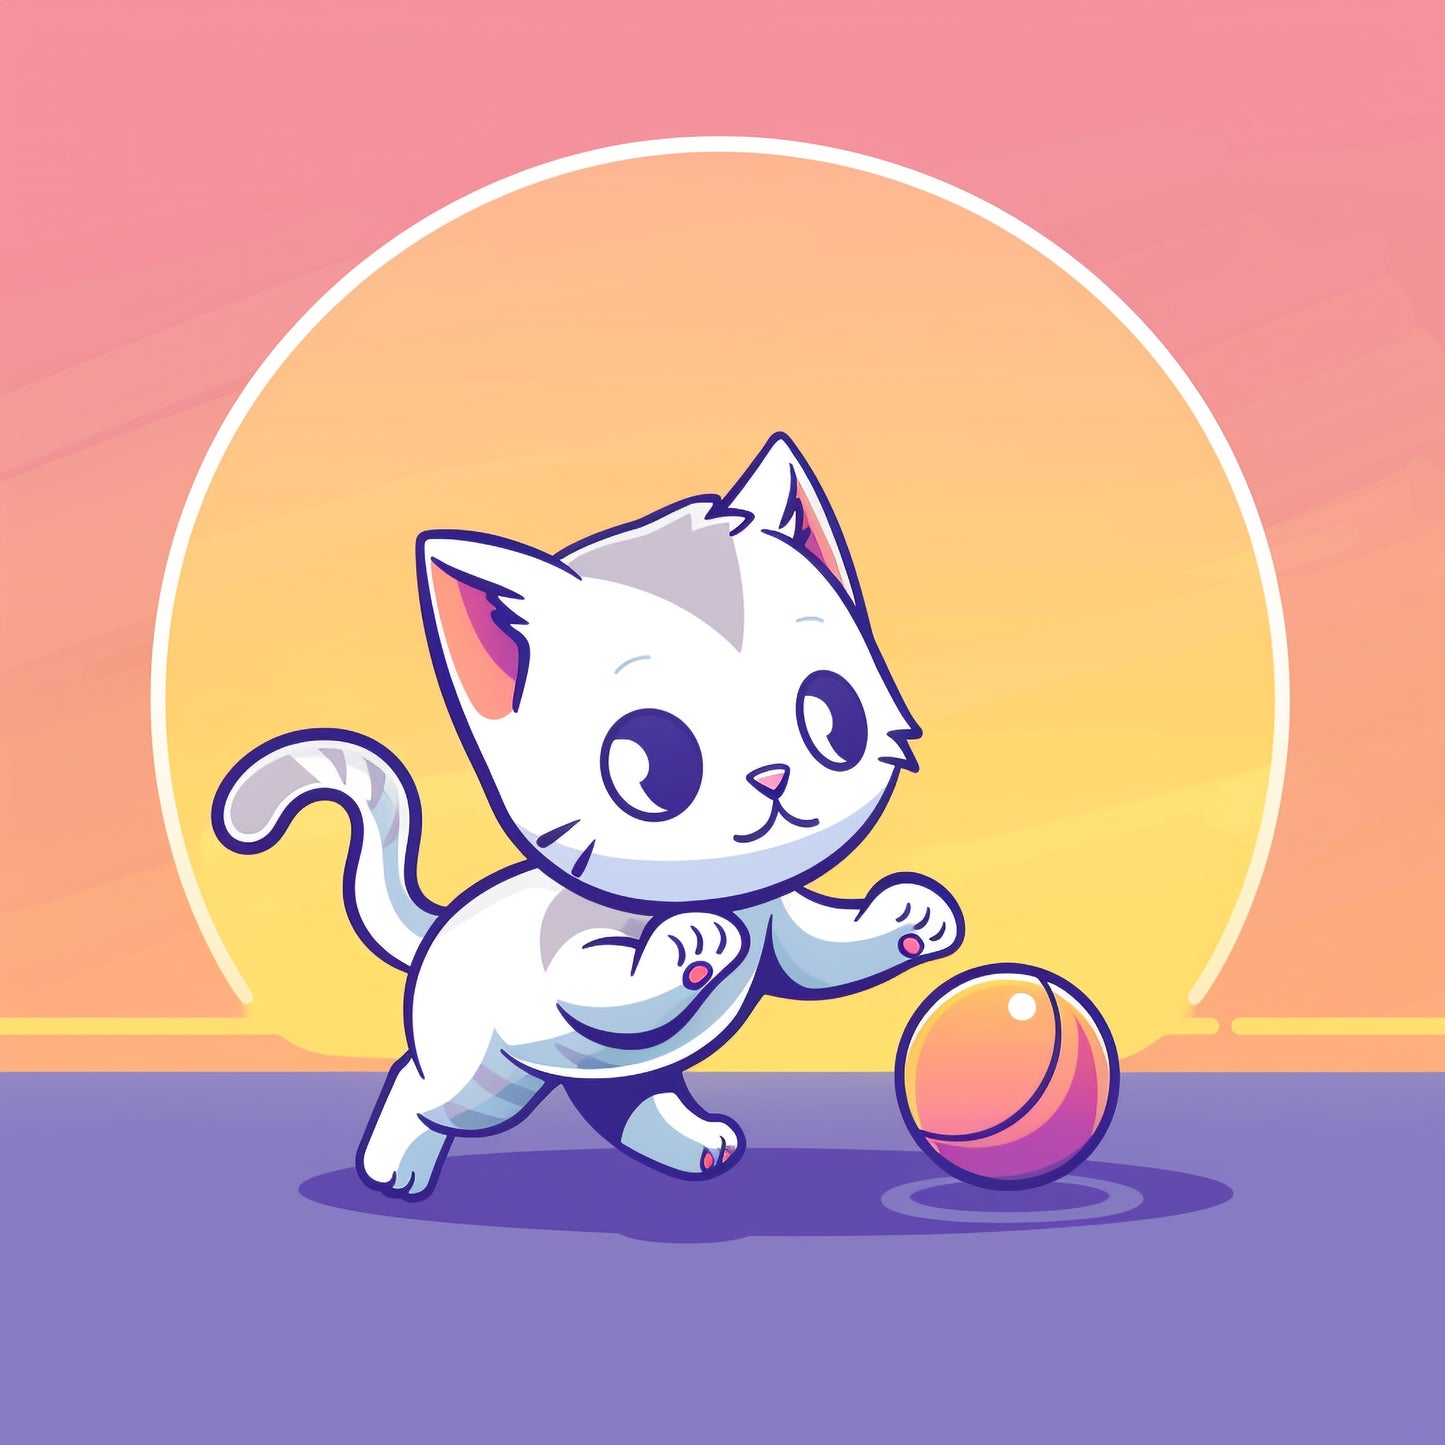 Adorable Kitten Playing with a Shiny Ball Illustration